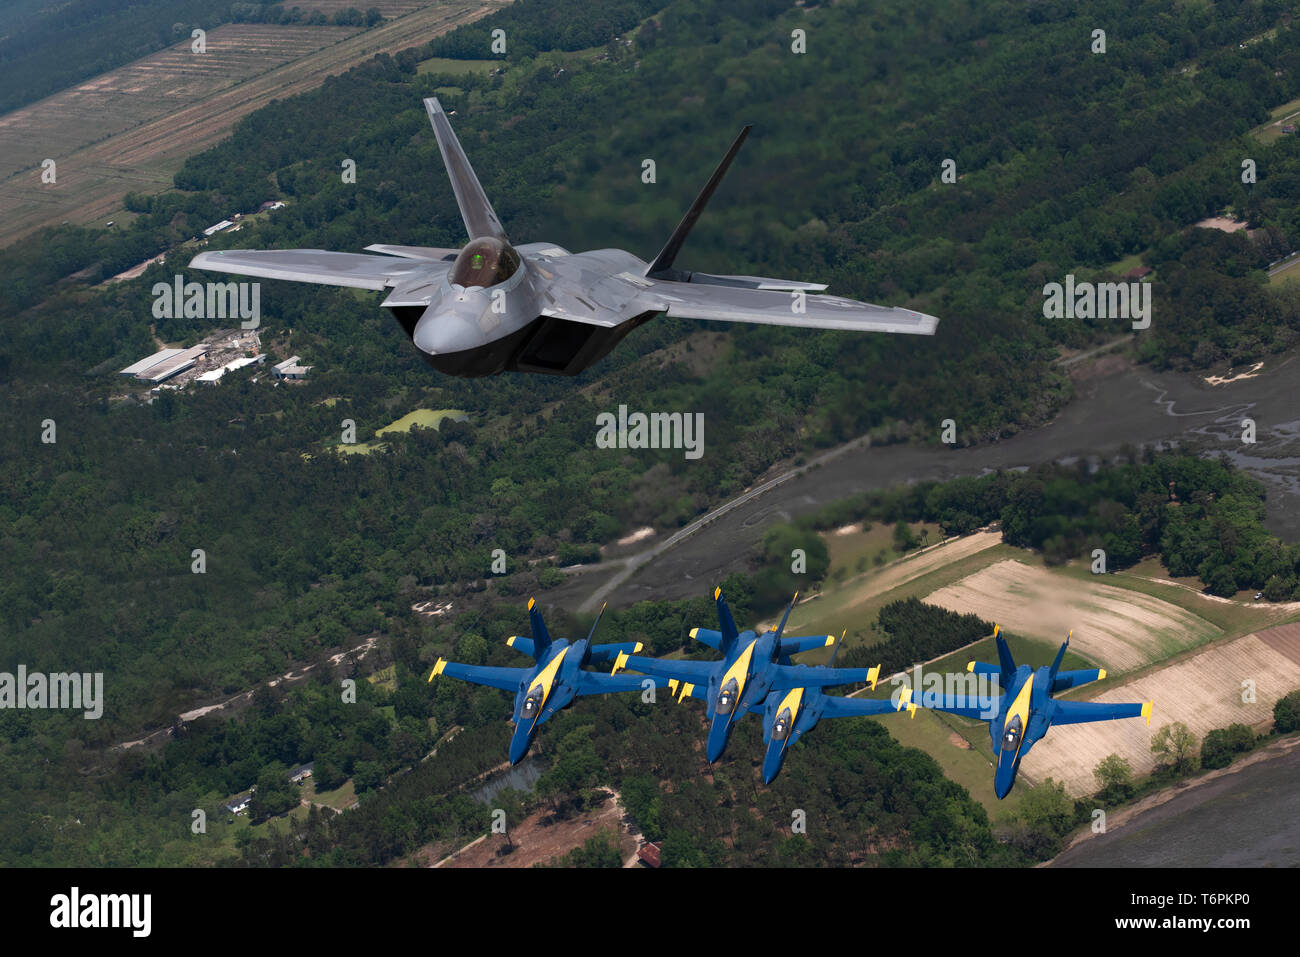 U.S. Air Force Maj. Paul 'Loco' Lopez, F-22 Demo Team commander/pilot, flies above the U.S. Navy Blue Angels' in Beaufort, South Carolina, April 25, 2019. This historic flight featured two of the world's premier aerial demonstration teams side-by-side in various formations. (U.S. Air Force photo by 2nd Lt. Samuel Eckholm)  Stock Photo